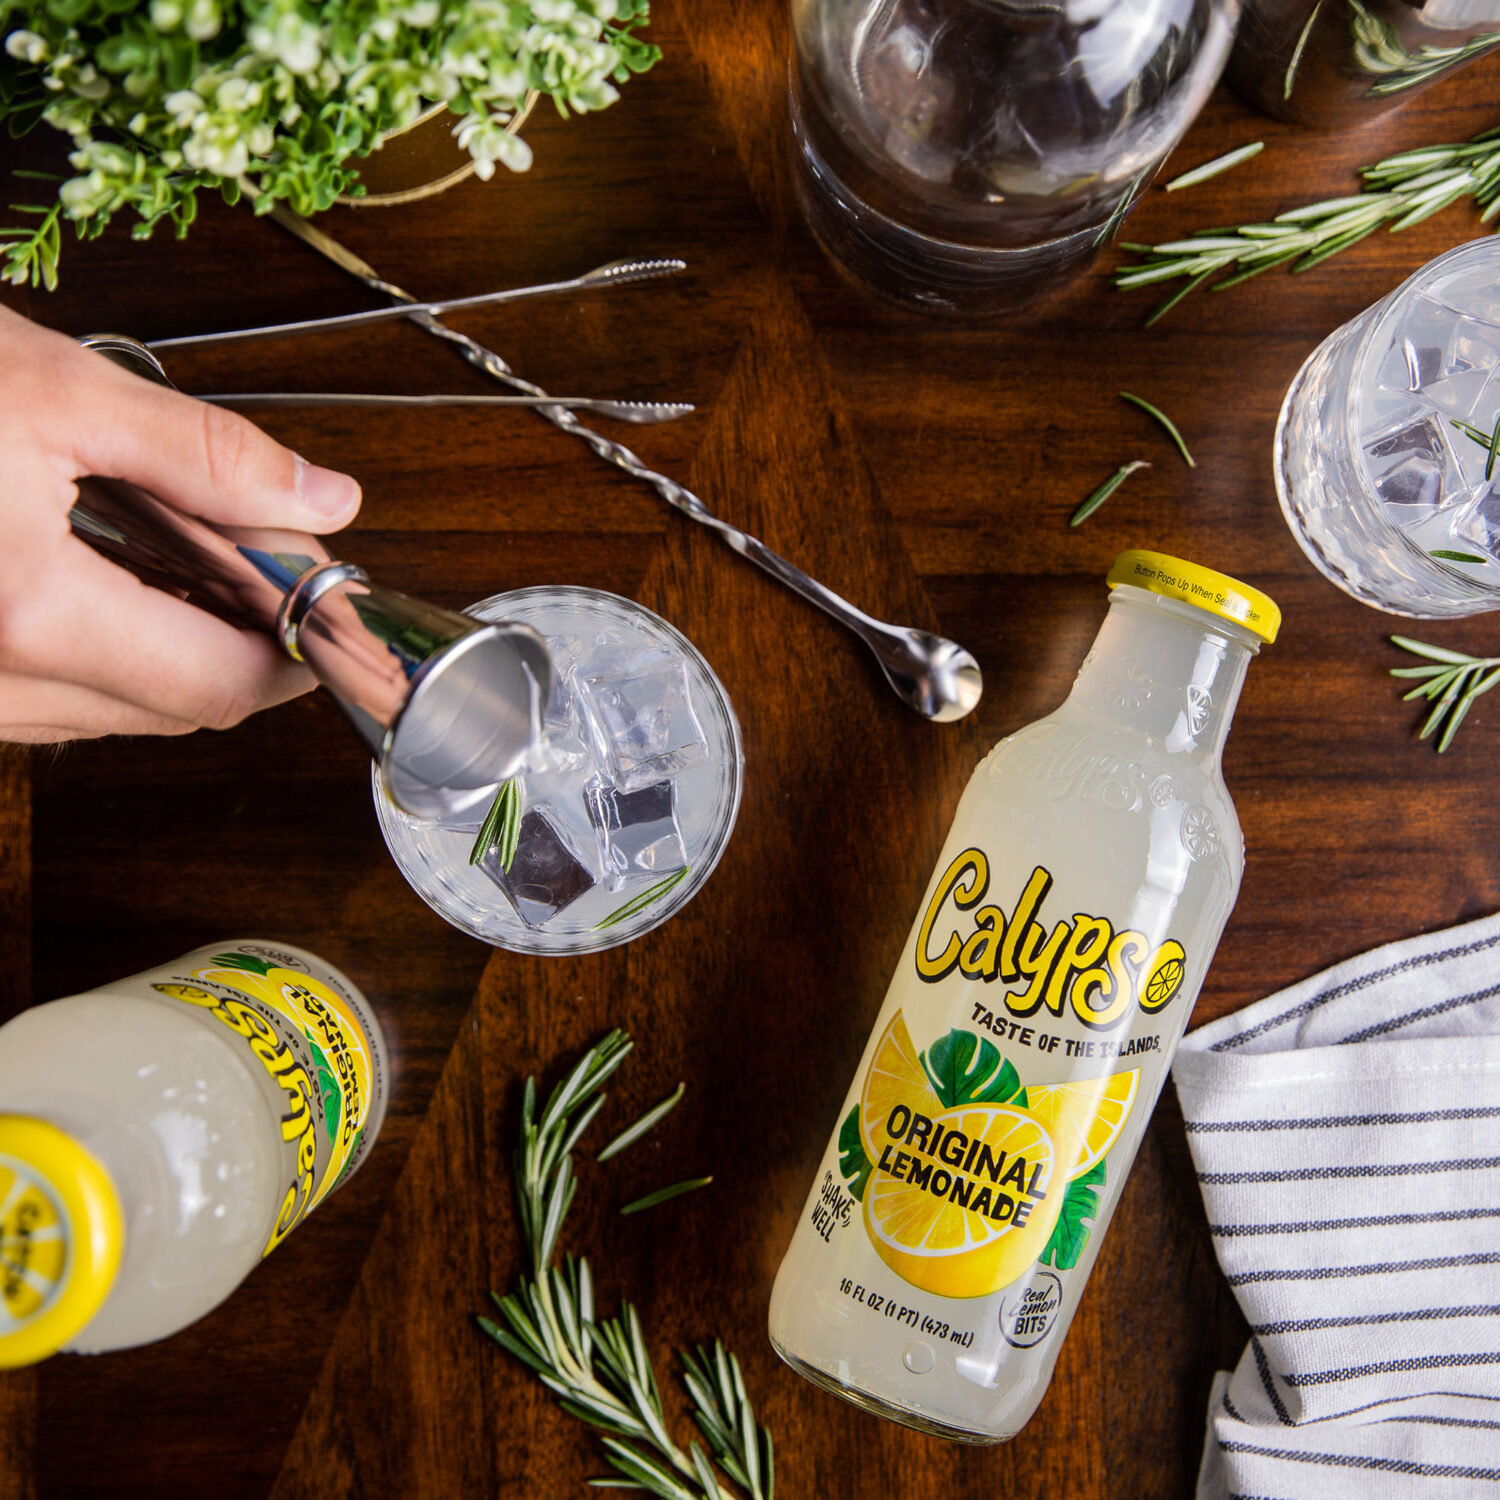 A person is preparing a Calypso Original Lemonade cocktail with rosemary and lemon.